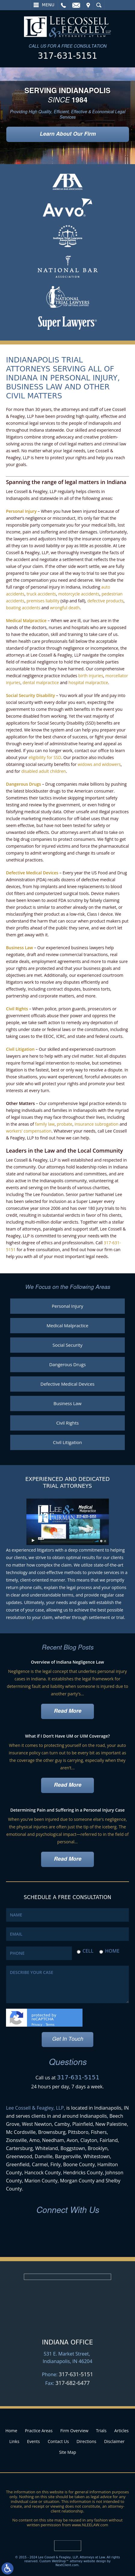 Lee, Nathaniel - Indianapolis IN Lawyers